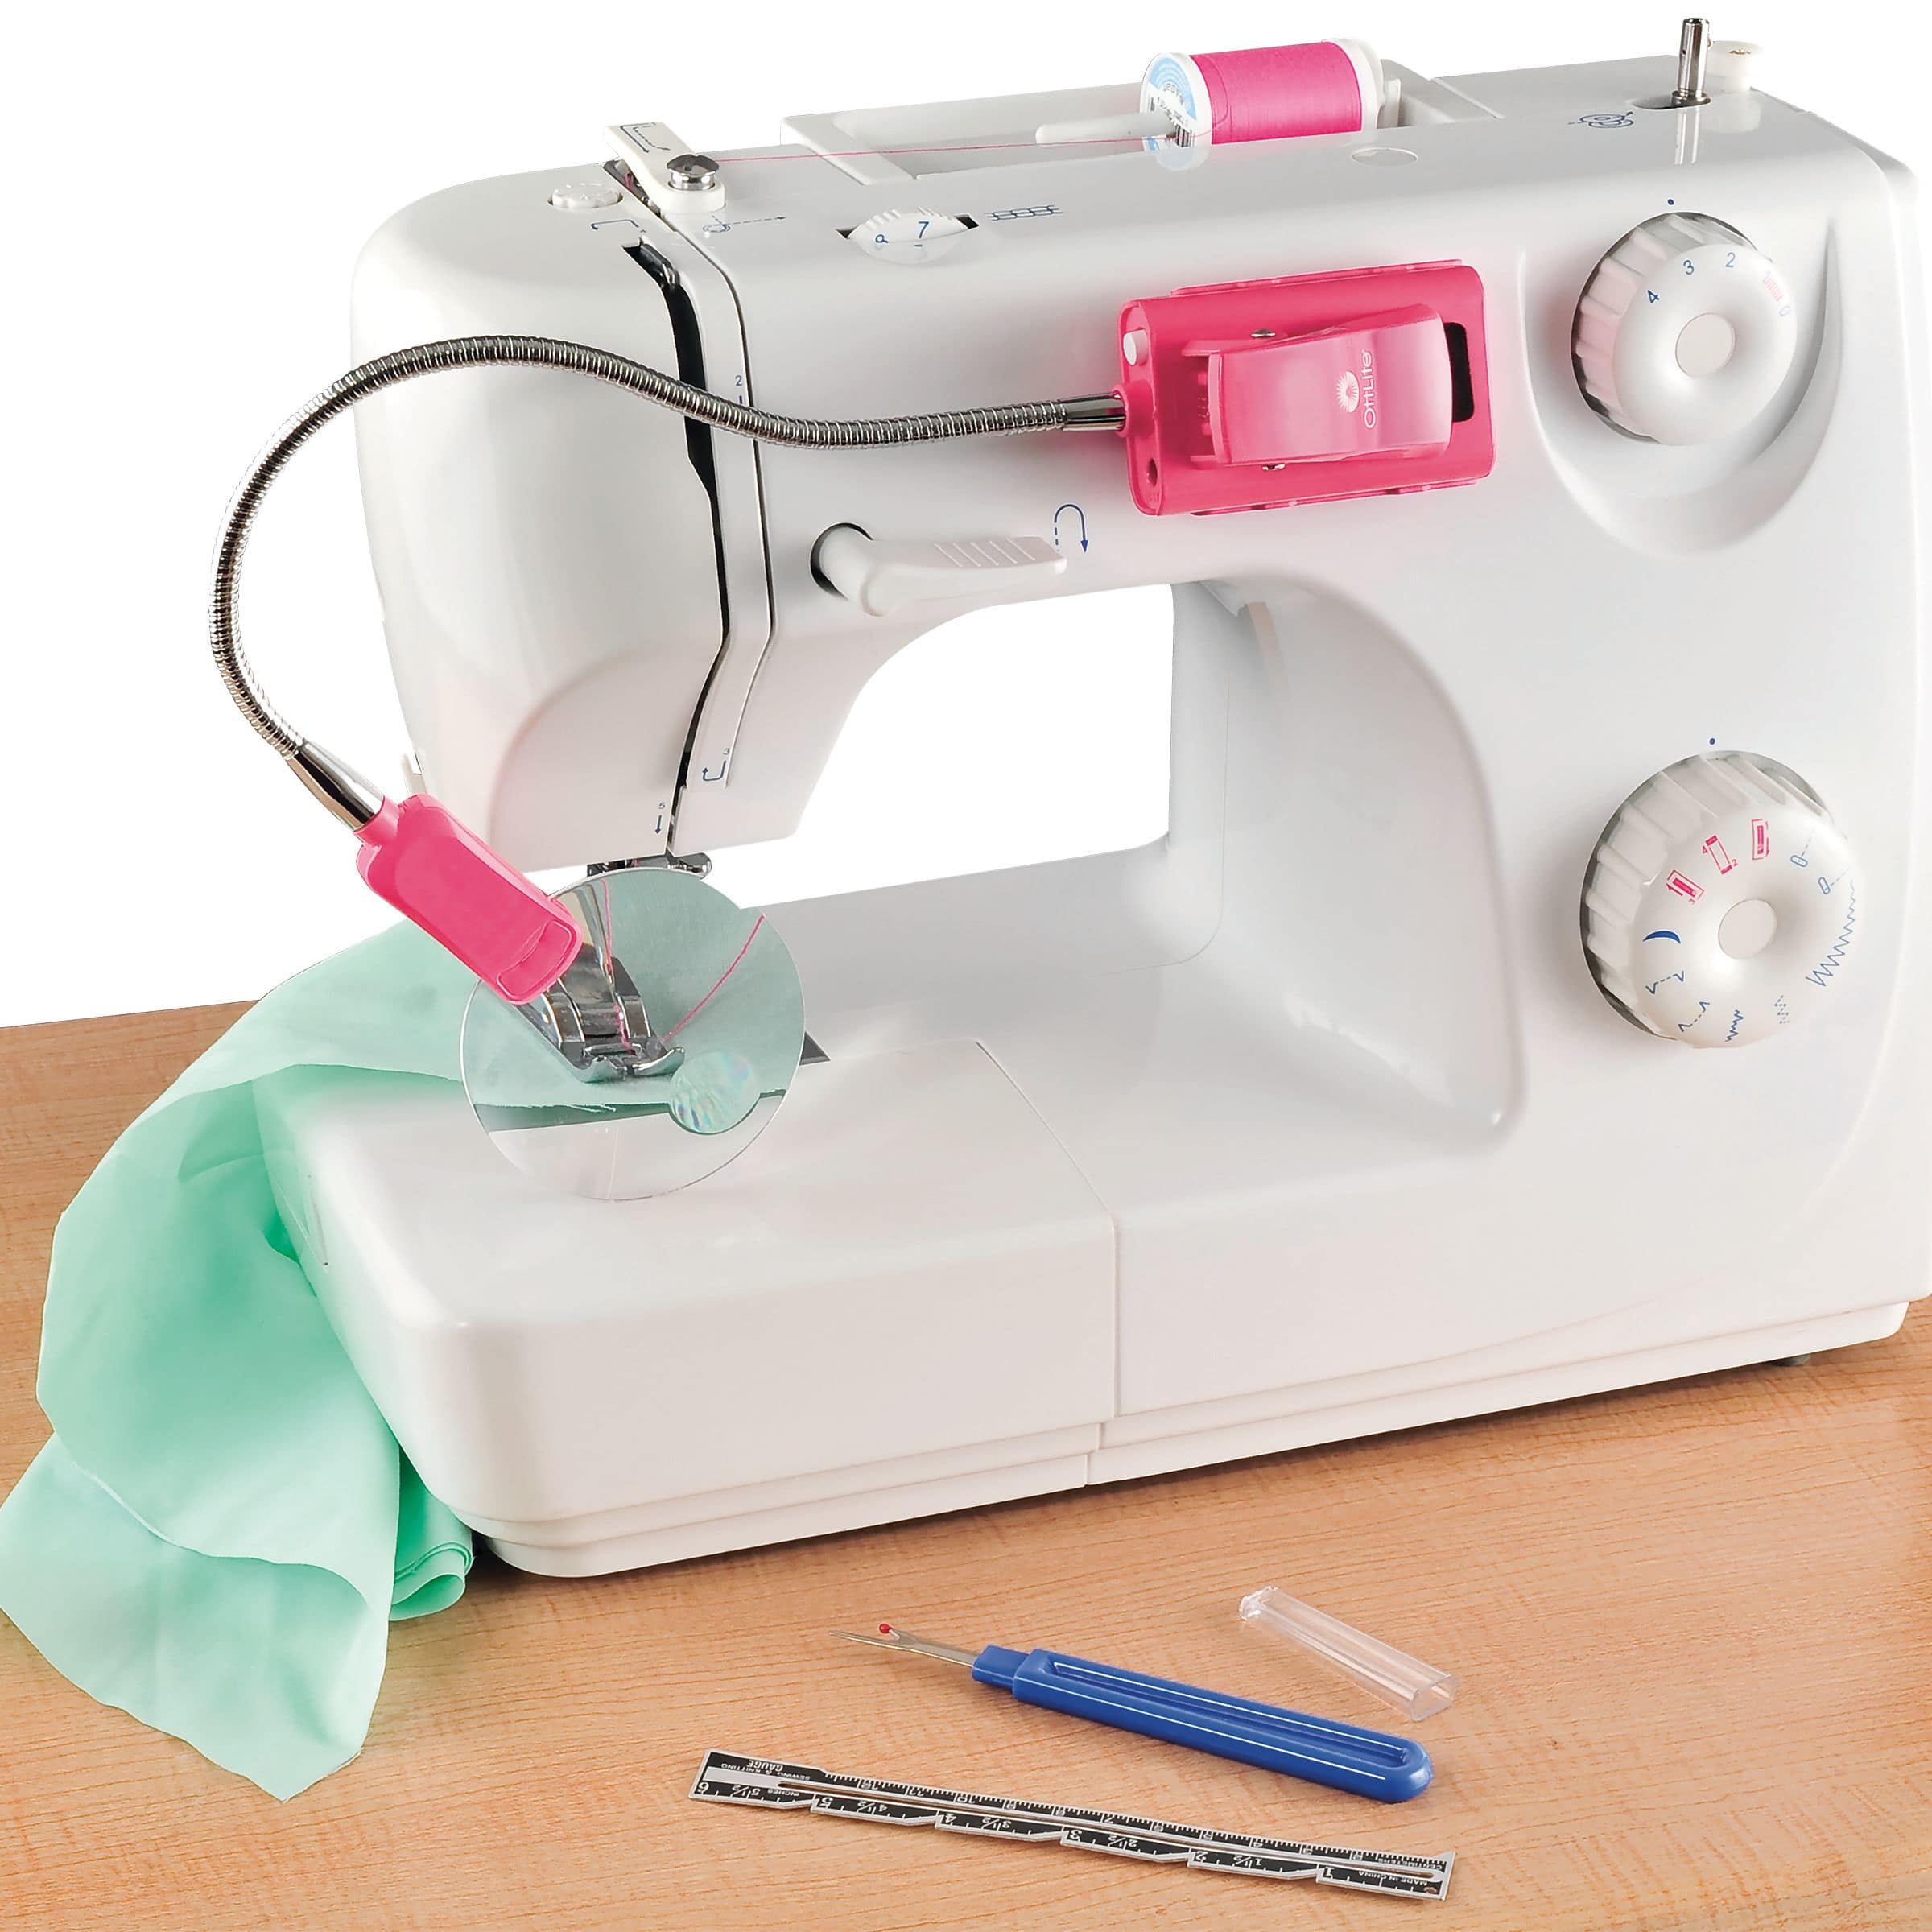 OttLite Pink 2-in-1 LED Sewing Machine Light